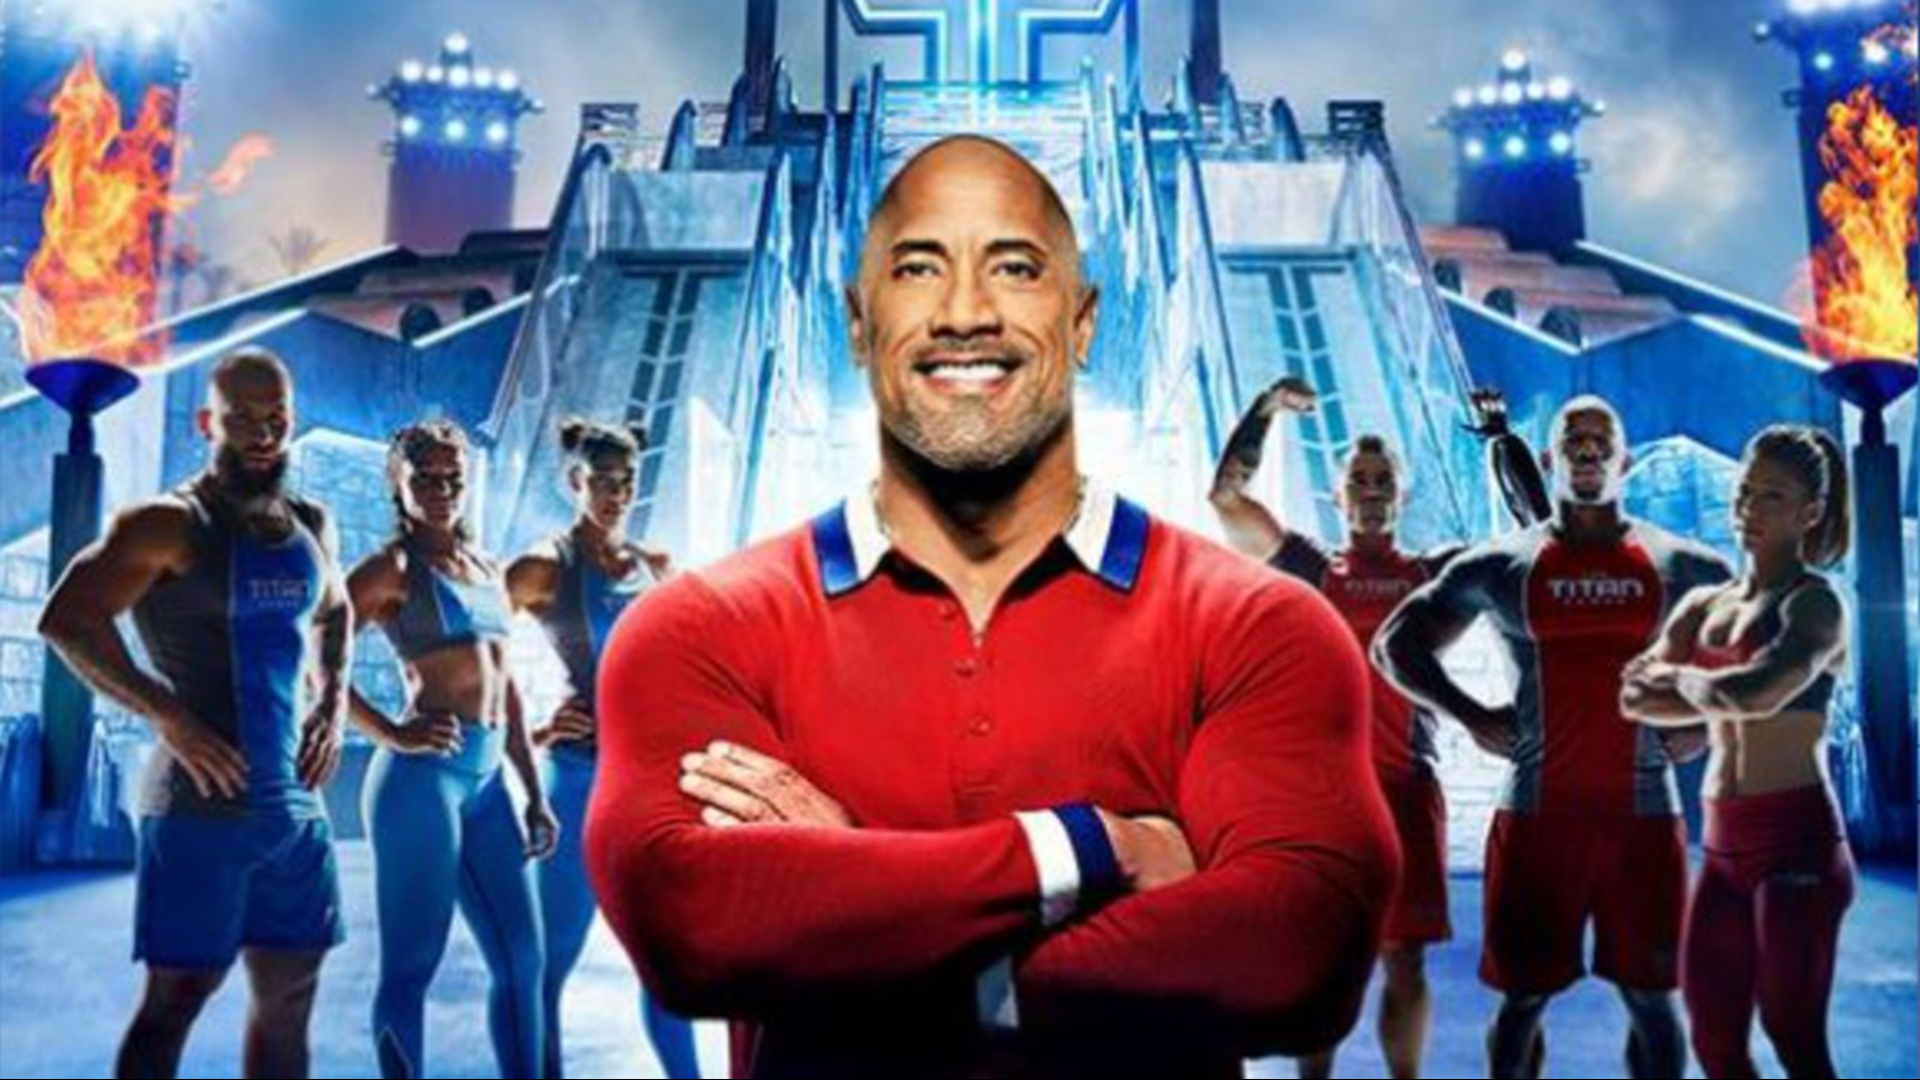 Dwayne "The Rock" Johnson hosts "The Titan Games" on NBC. Colorado natives competing on the show stopped by 9NEWS to chat about the experience. The competition premieres on Jan. 3, 2019 on 9NEWS.